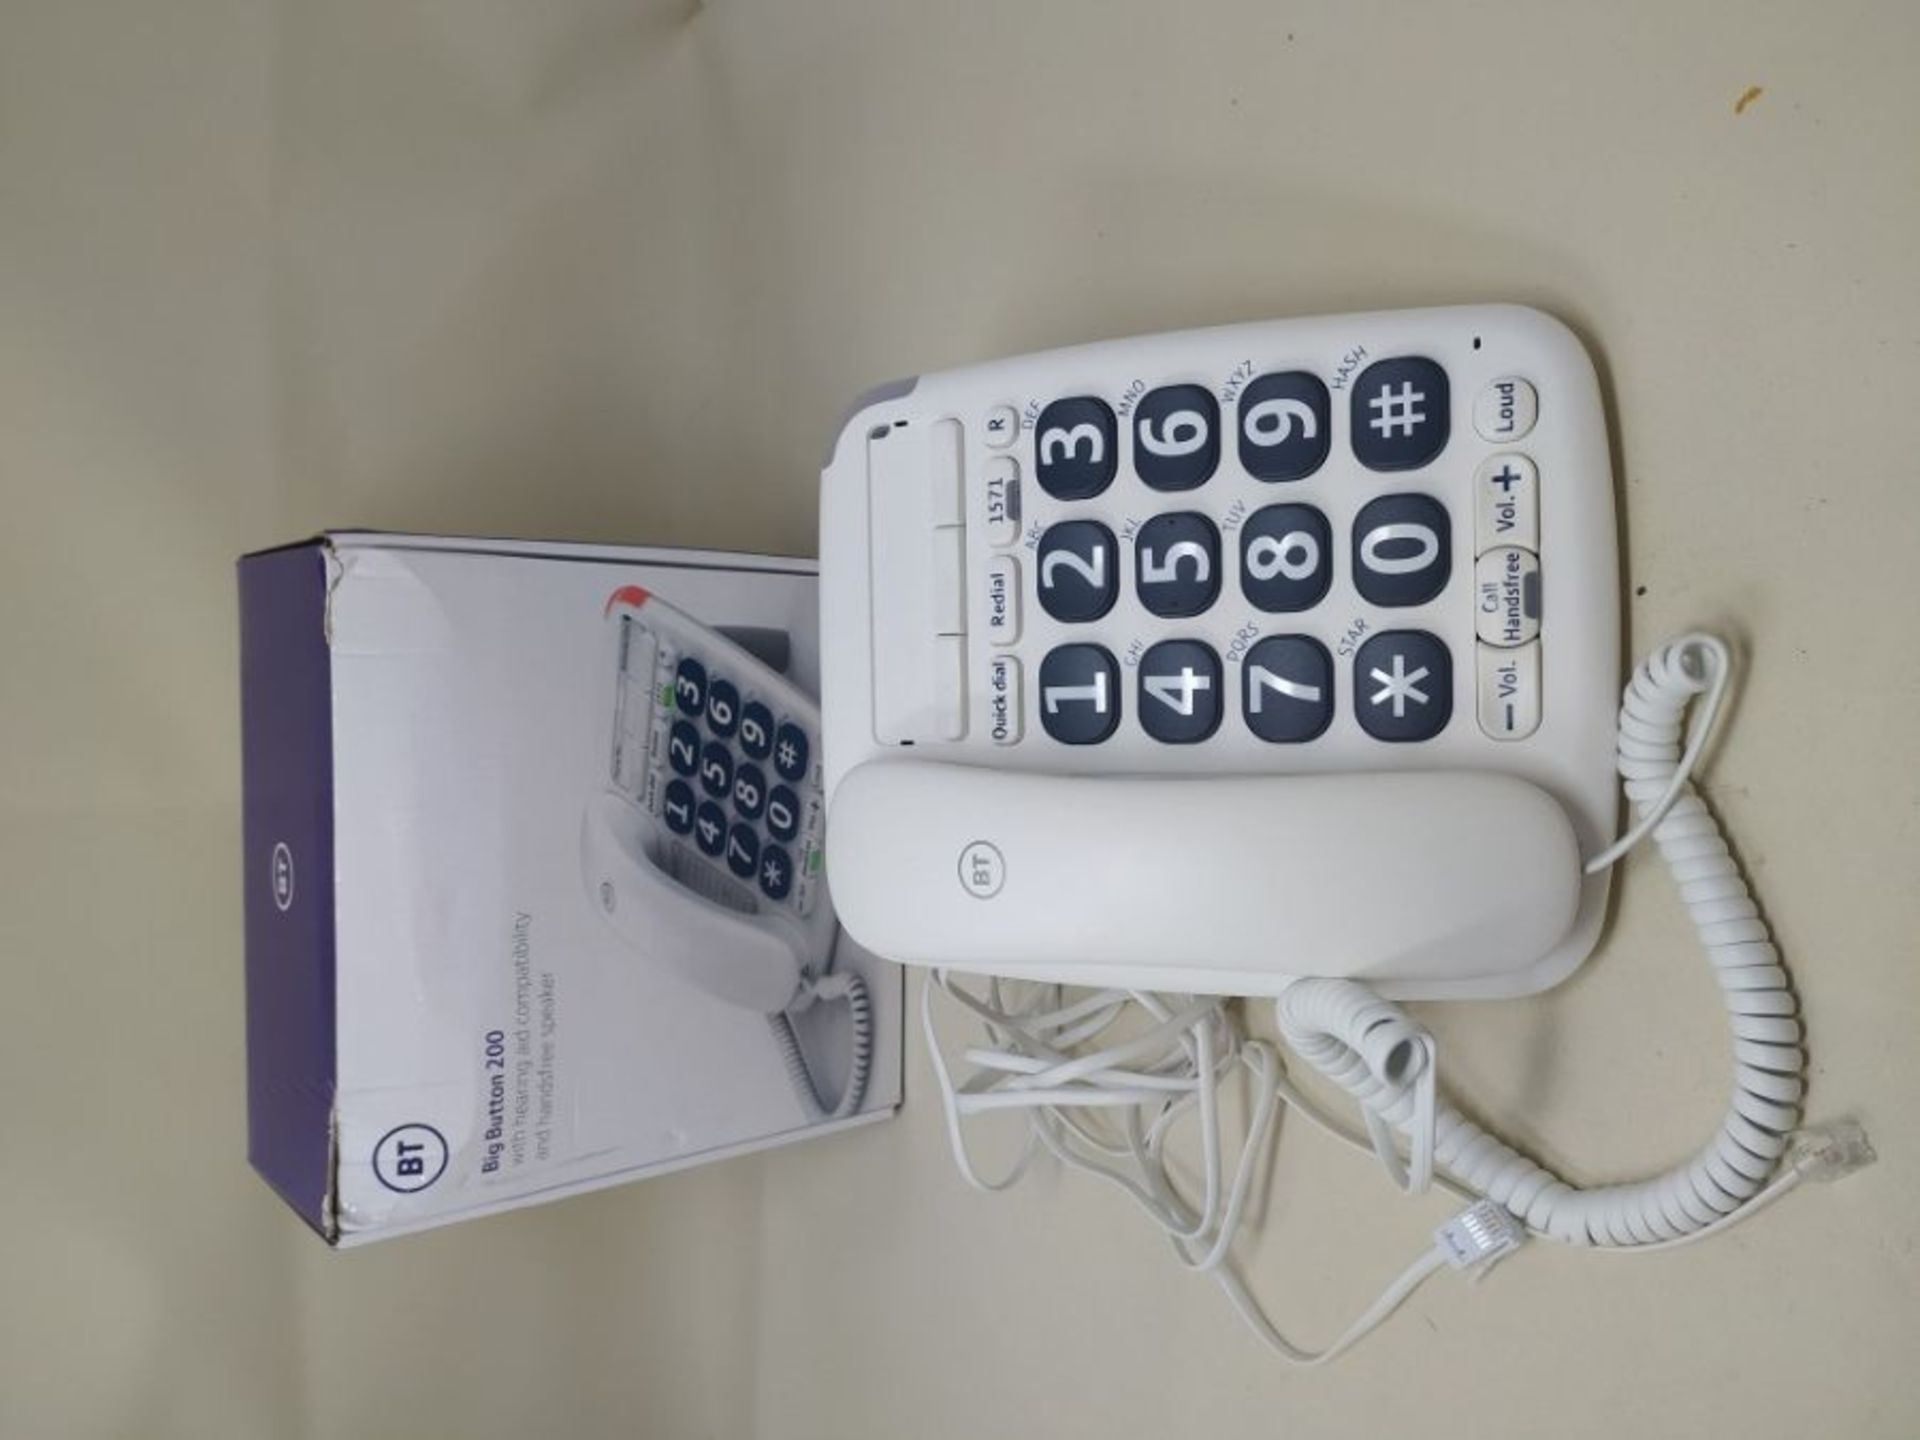 BT Big Button 200 Corded Telephone, White - Image 2 of 2